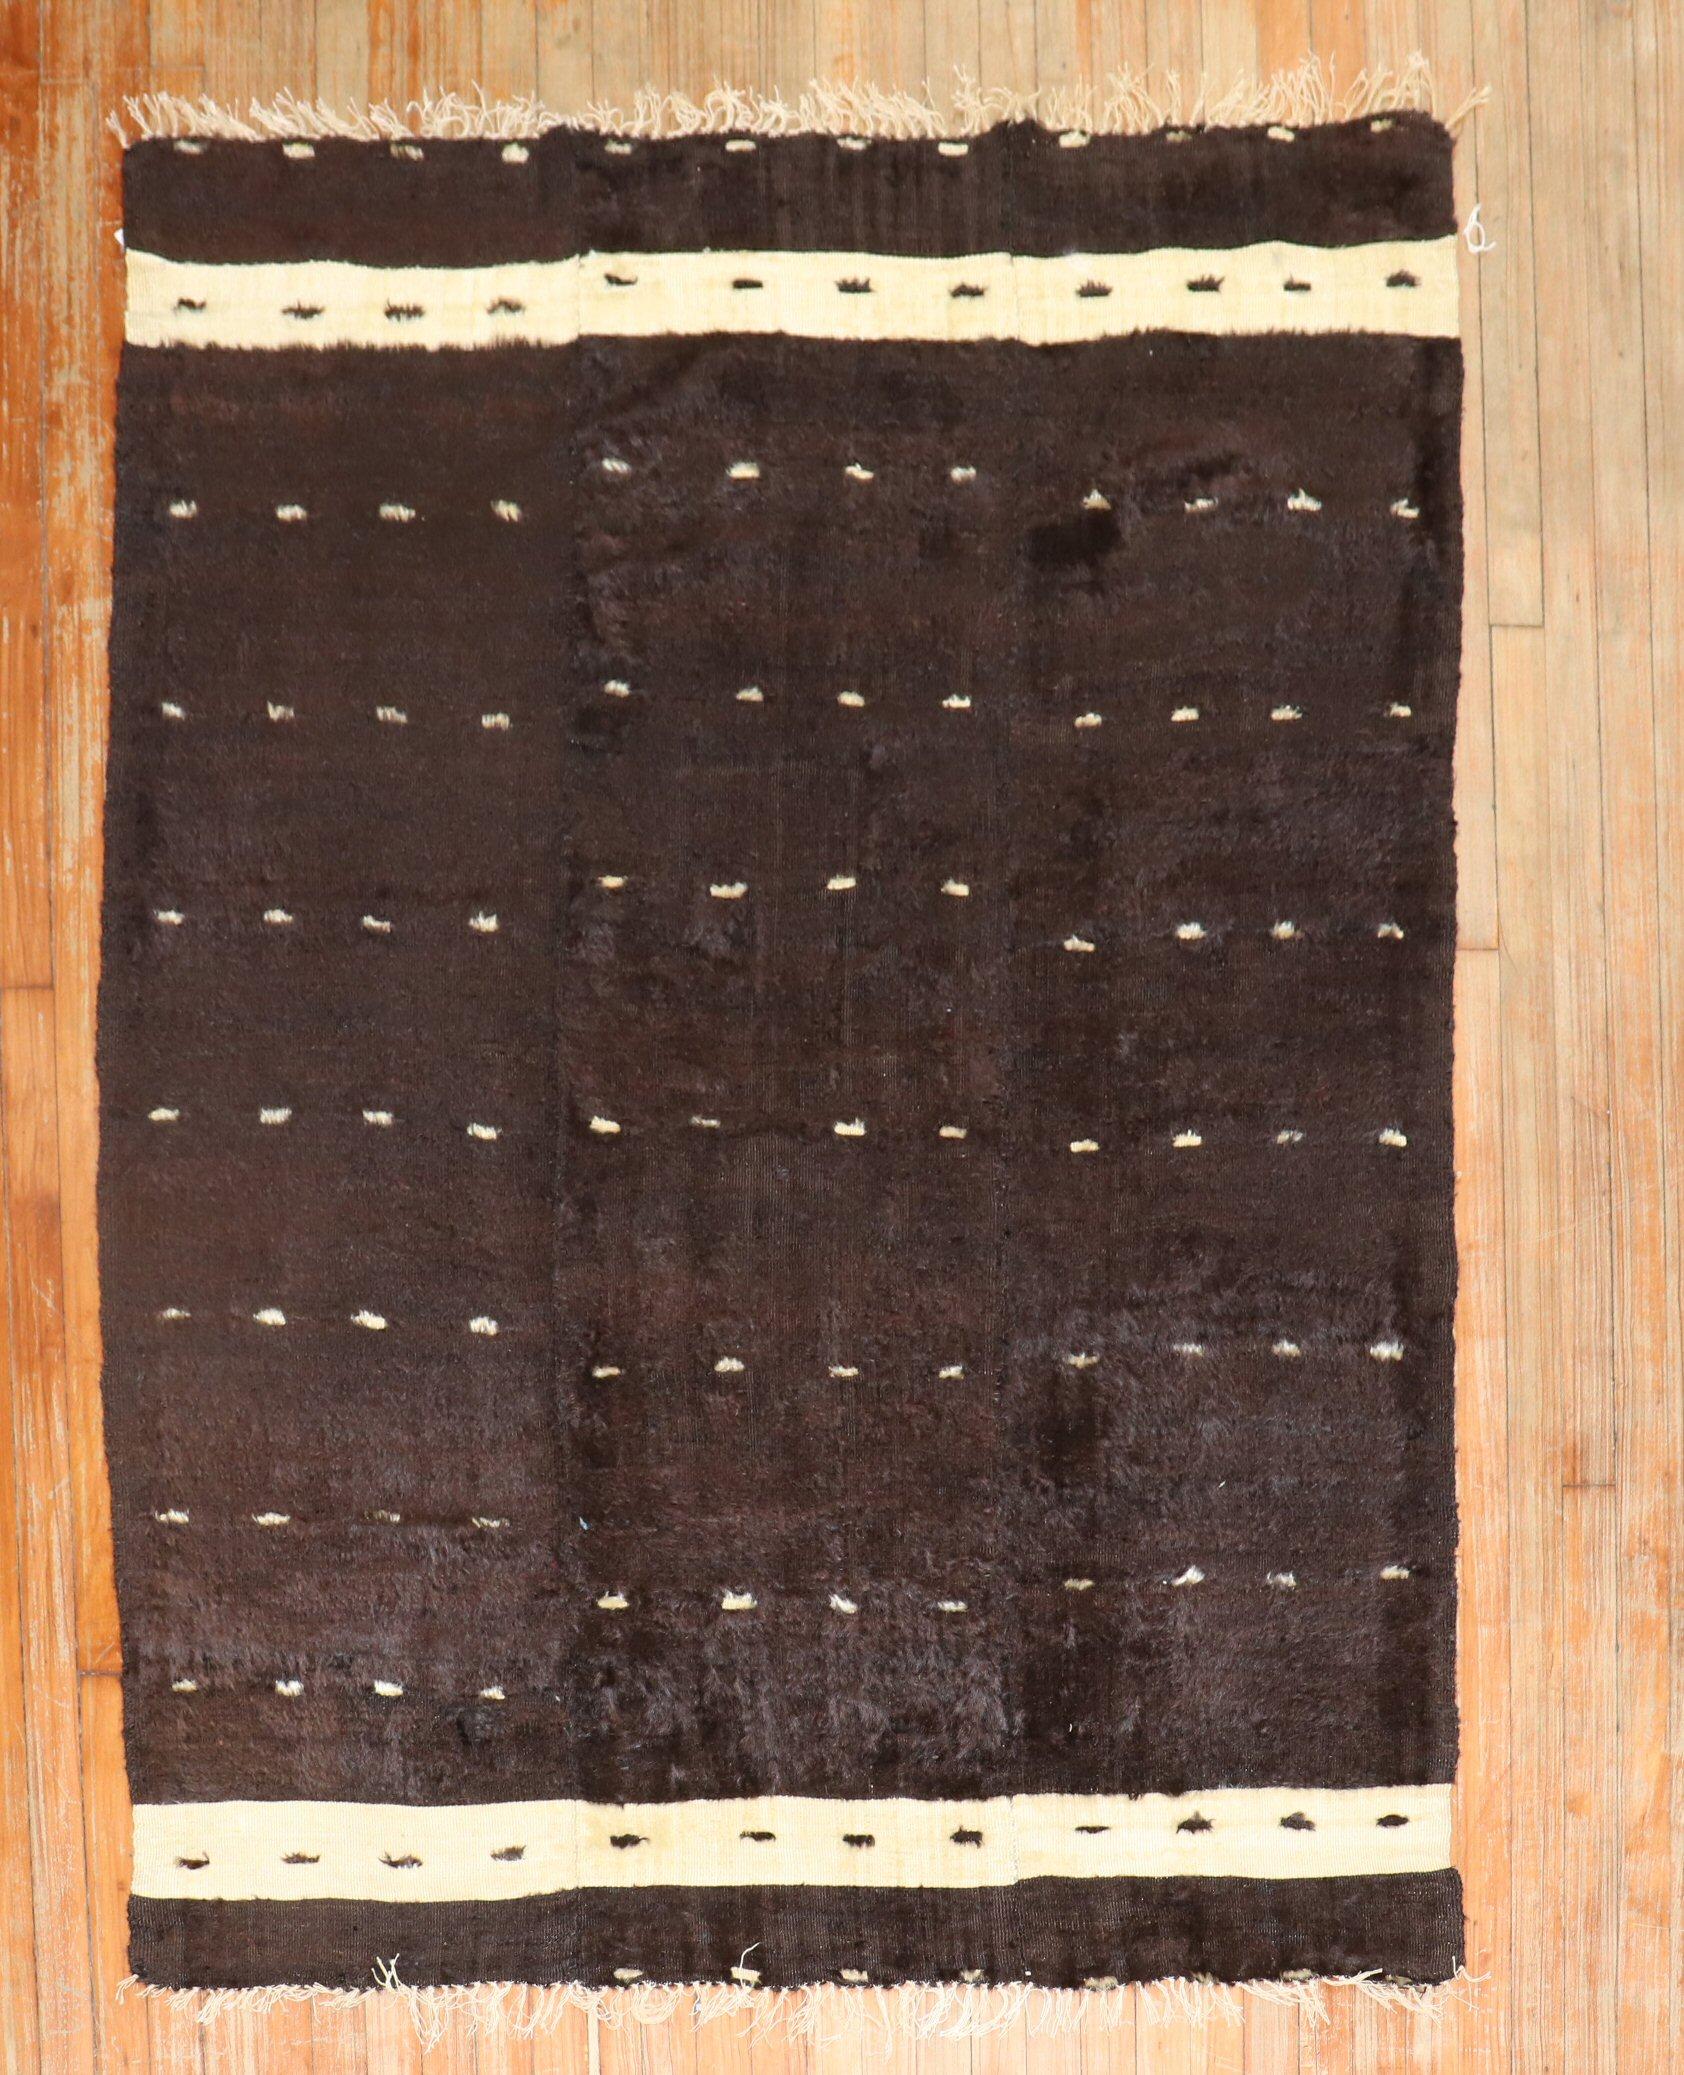 An early 20th century one of a kind Turkish Sirt rug woven with mohair wool. These pieces are inspired by traditional tribal weaving's but they are used mostly for decorative purposes and have a strong modernist appeal. The unique pile technique